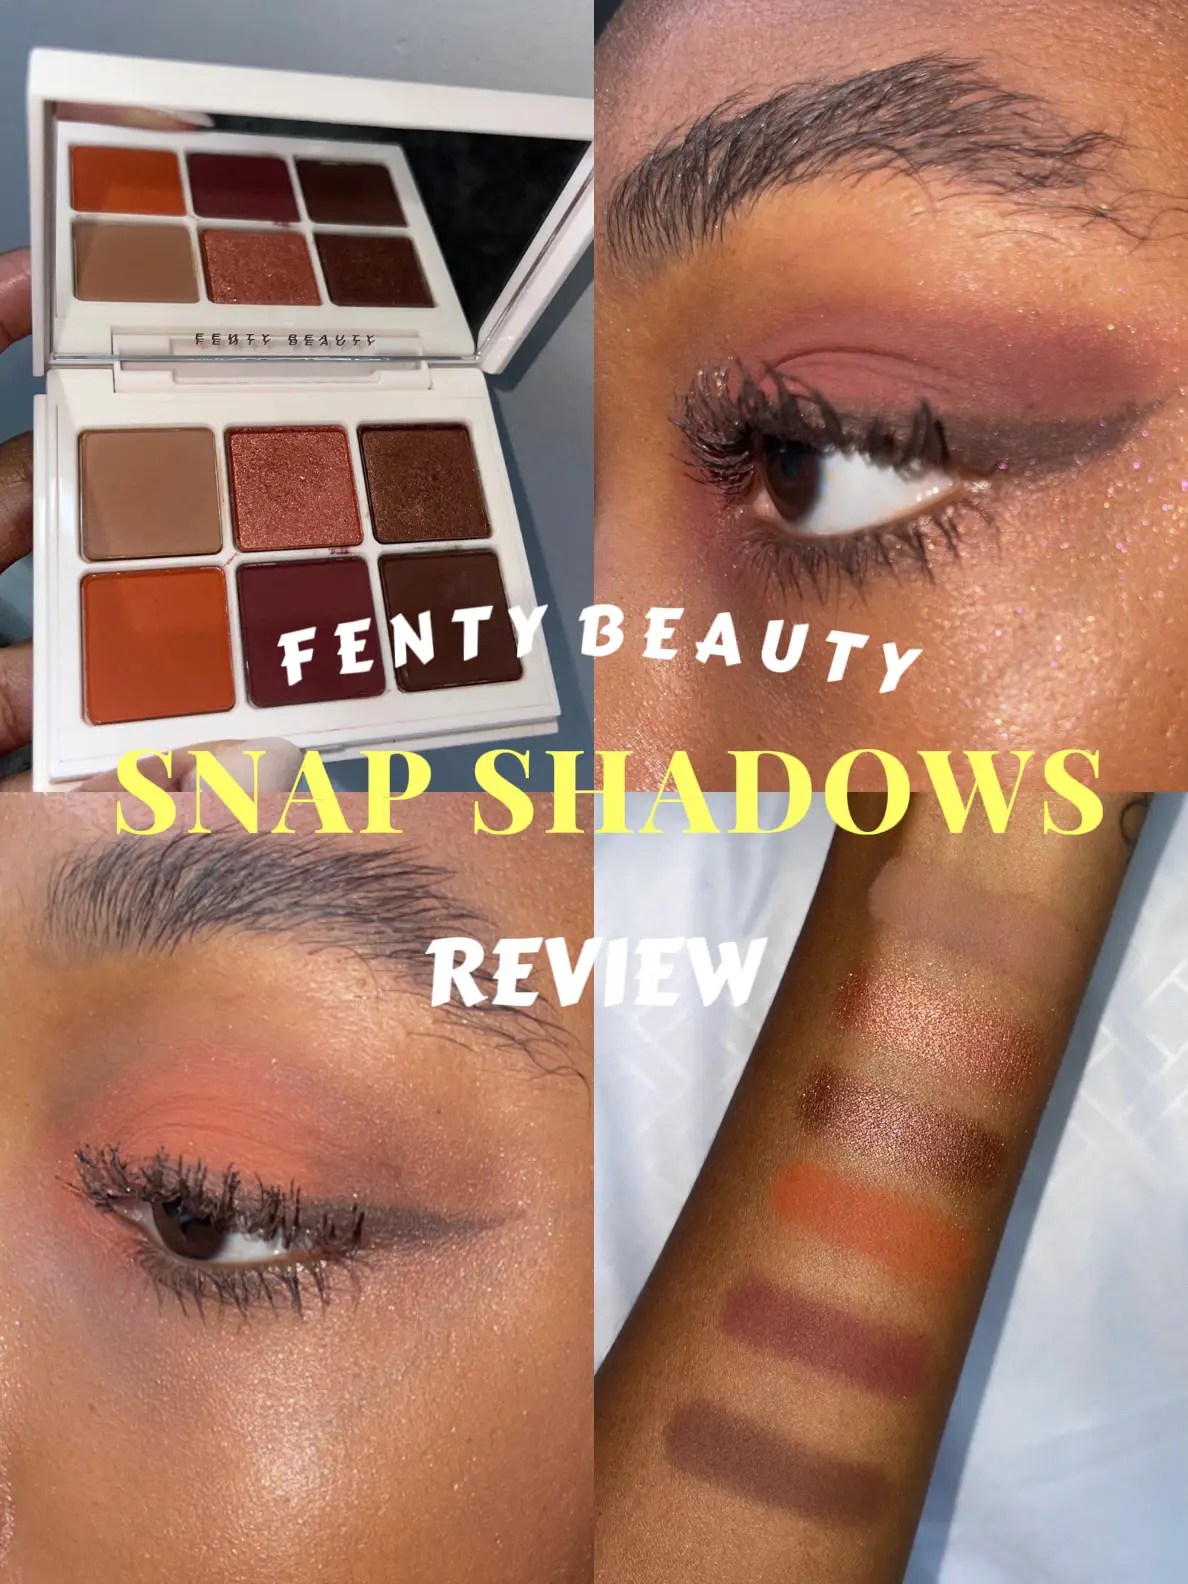 Fenty Beauty Snap Shadows: Swatches & Review